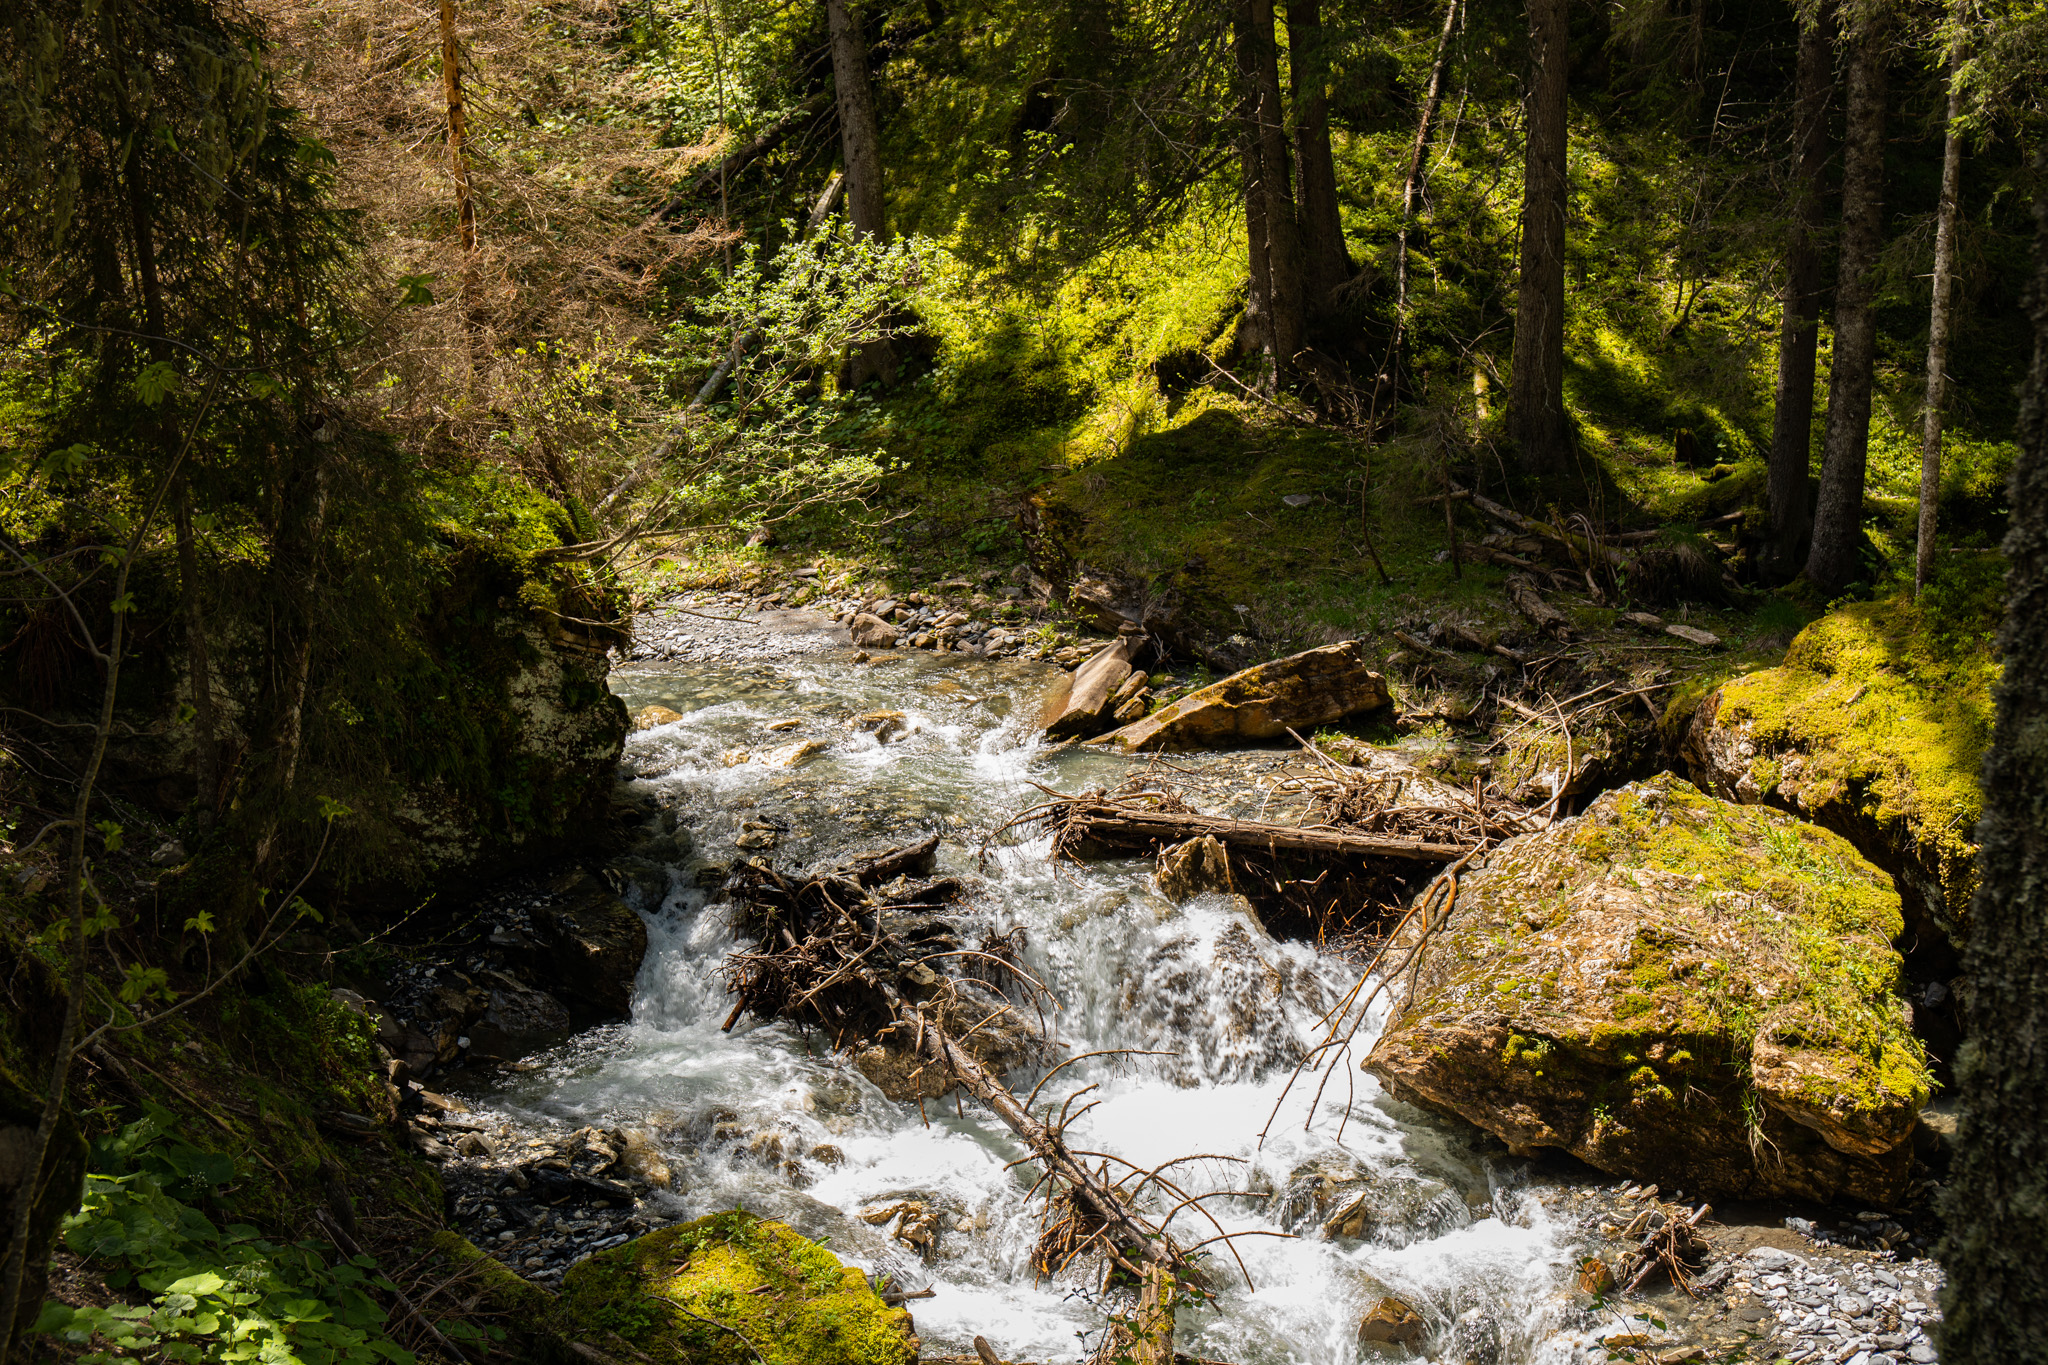 General 2048x1365 outdoors nature photography greenery trees forest stream water rocks moss lichen